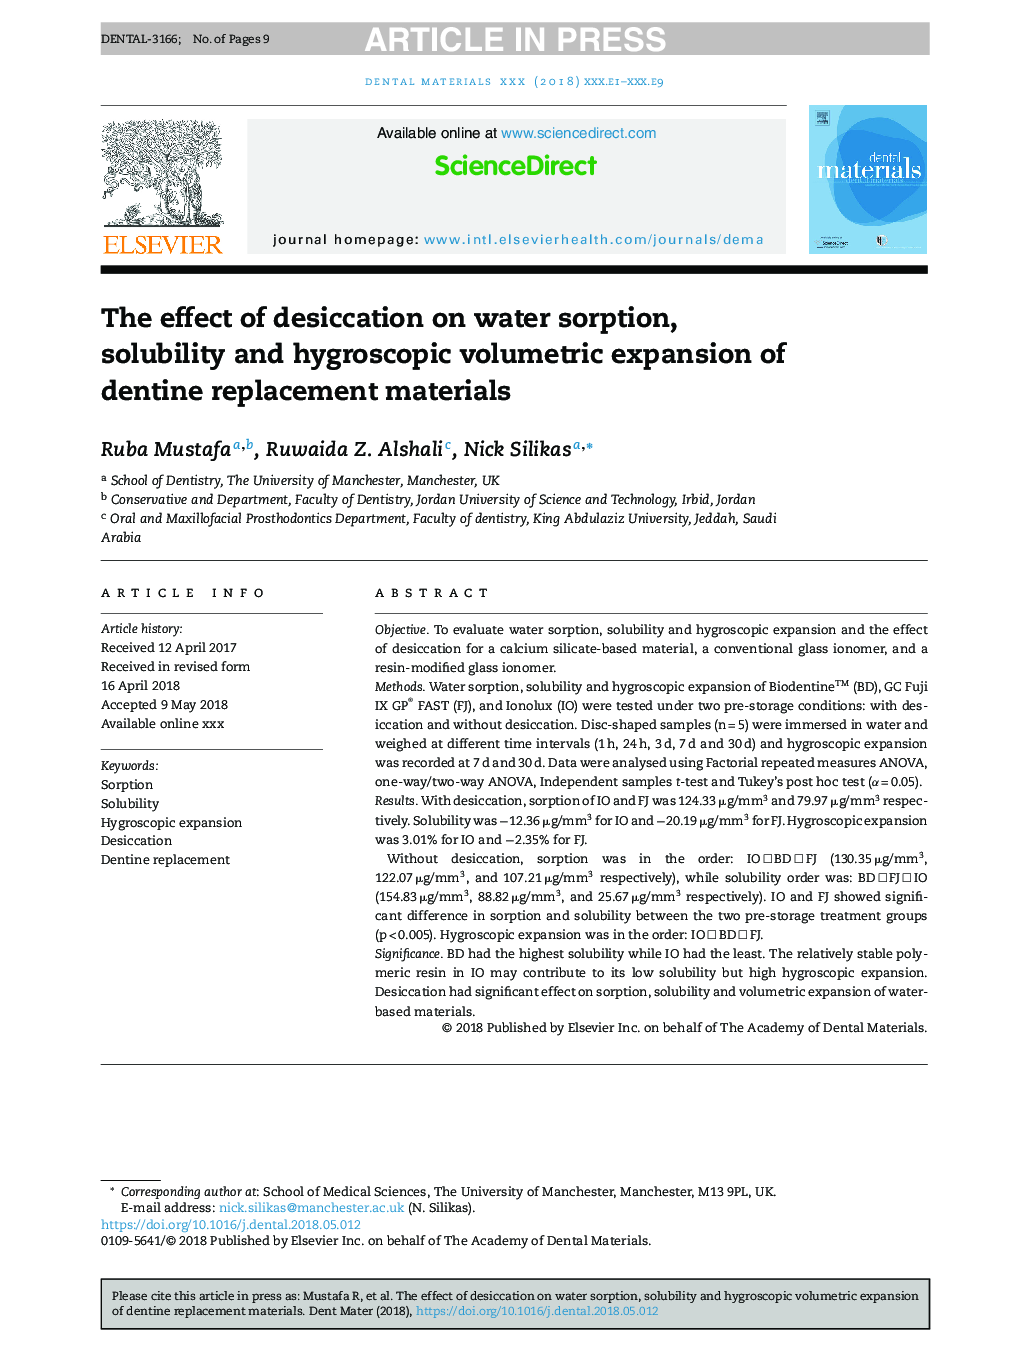 The effect of desiccation on water sorption, solubility and hygroscopic volumetric expansion of dentine replacement materials